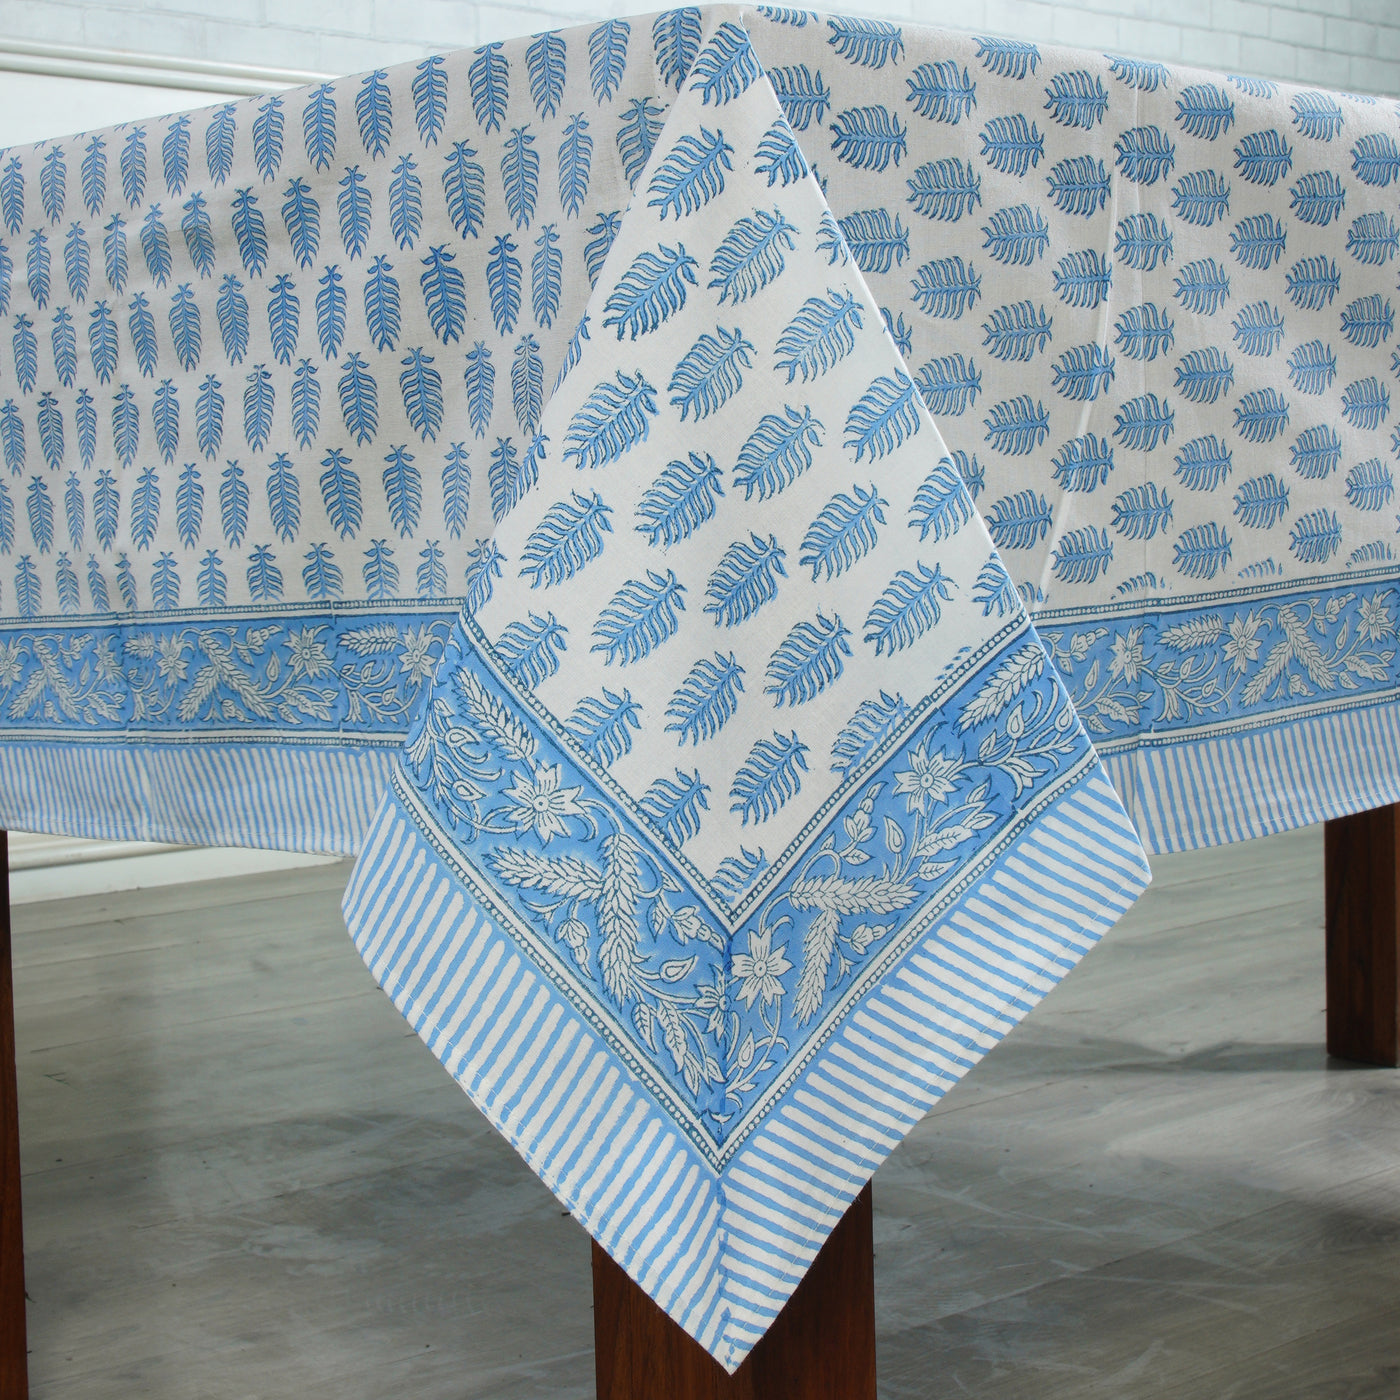 Fabricrush Cerulean Blue and White Handmade Indian Block Print Easter Thanksgiving Tablecloth